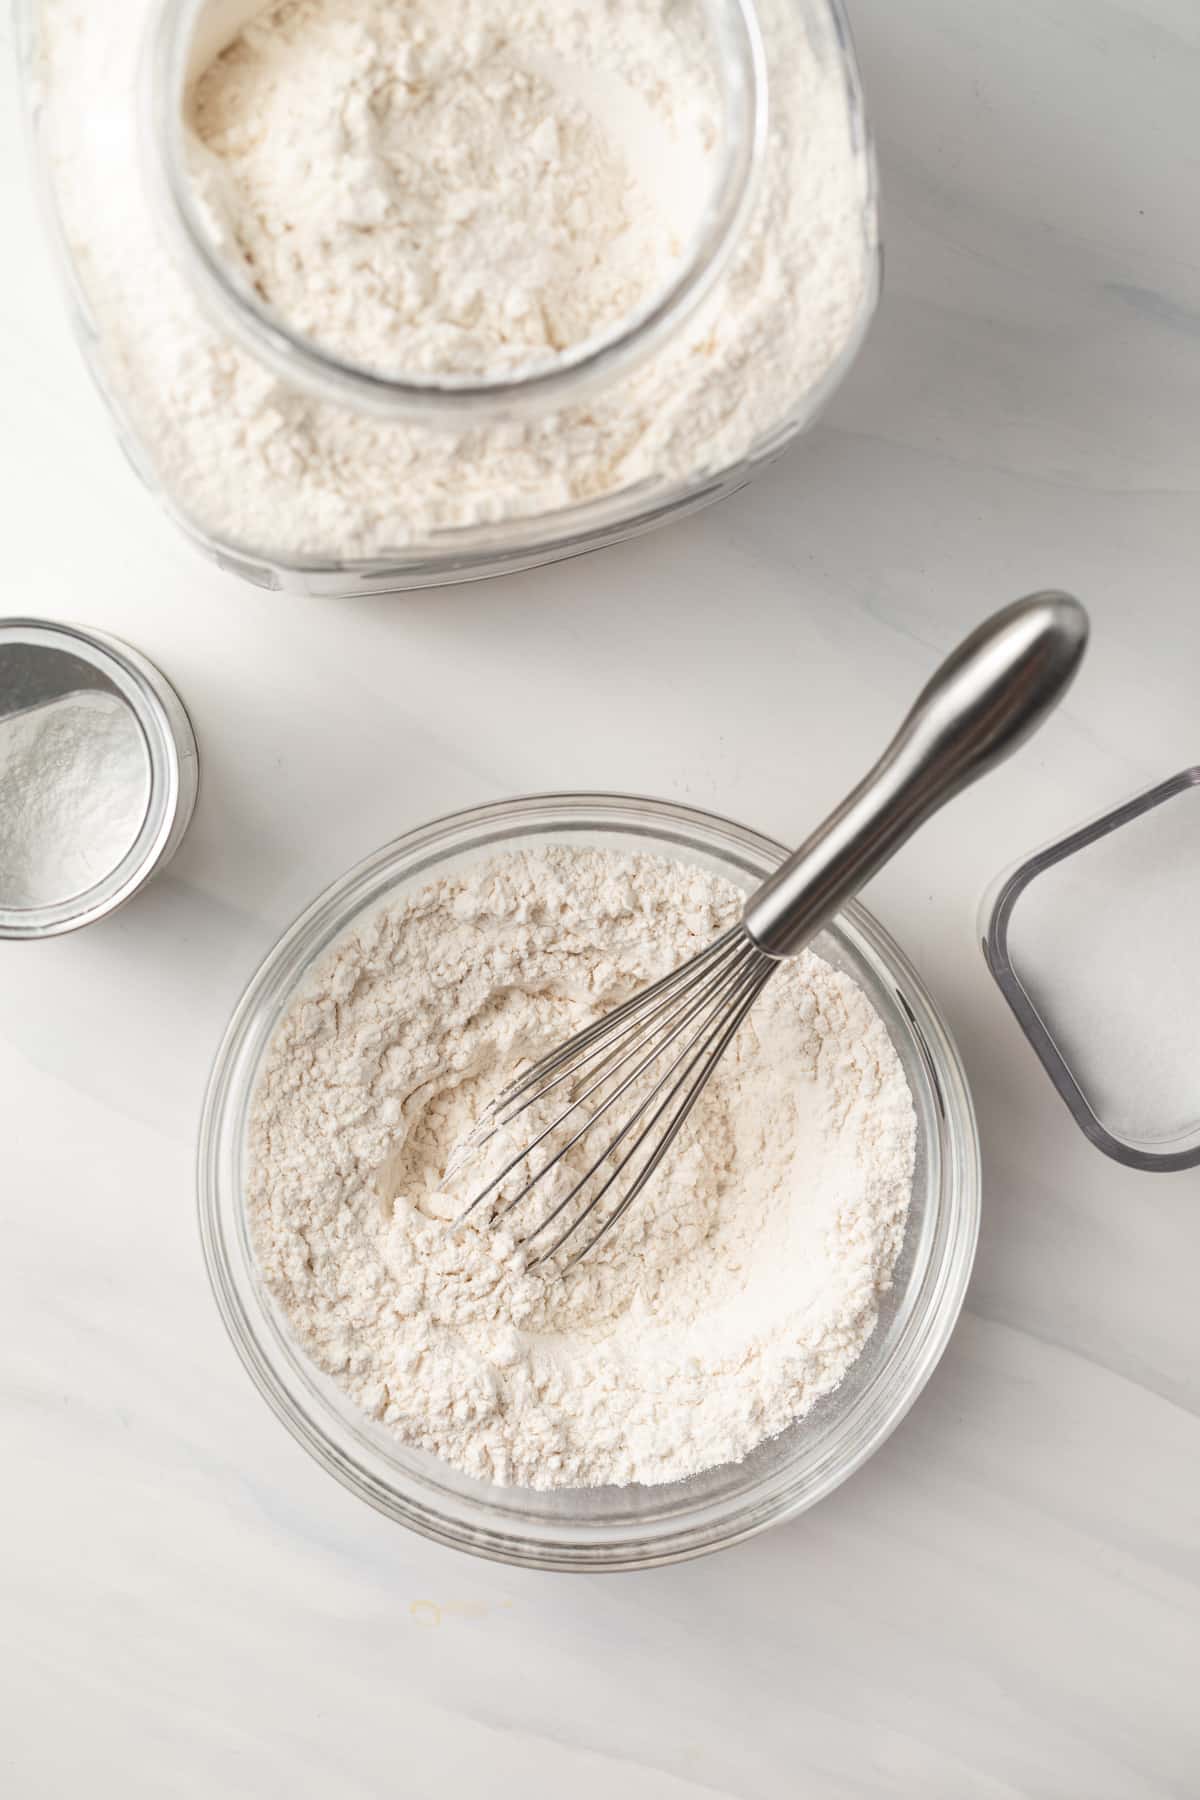 Self raising flour whisked in a bowl.